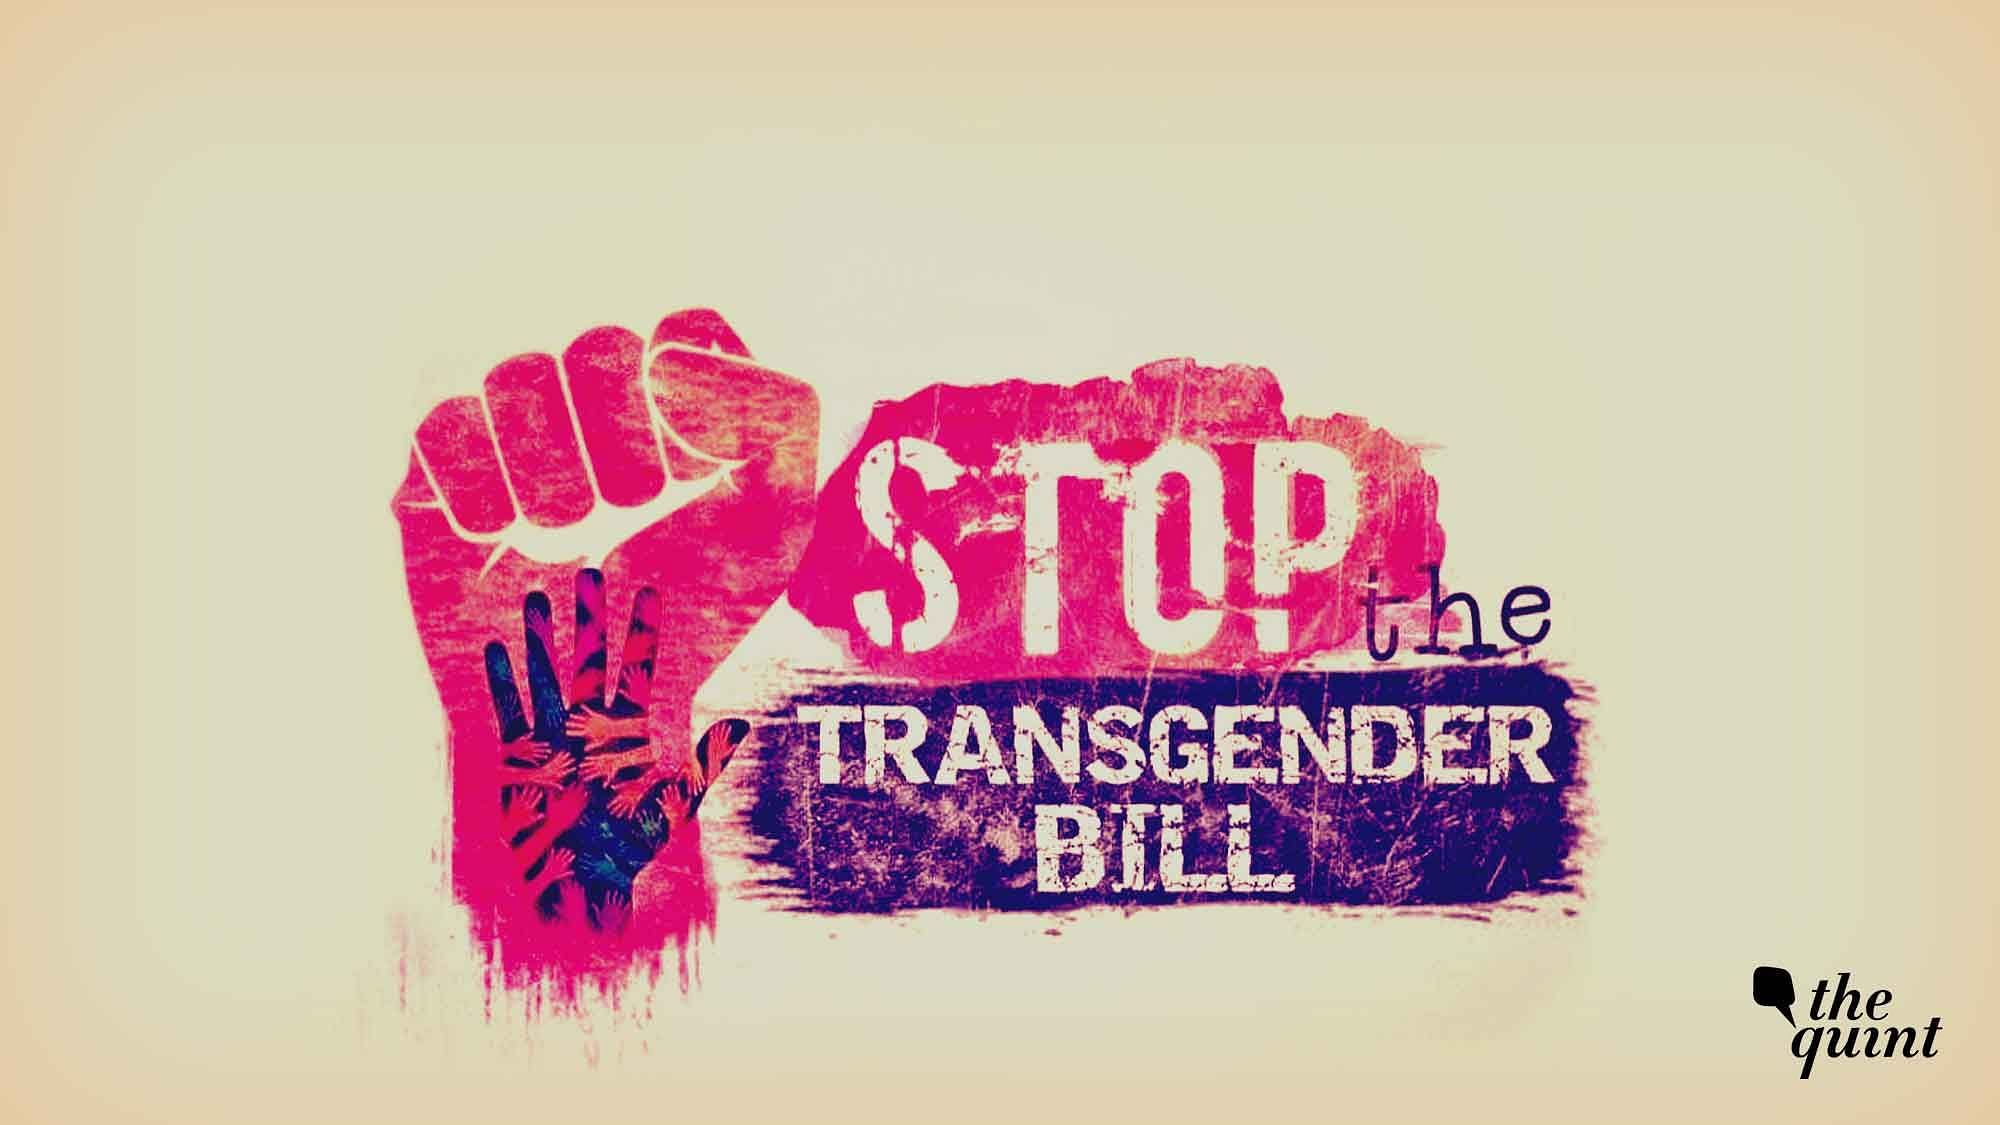 The transgender community protest the Transgender Persons (Protection of Rights) Bill 2018 across India.